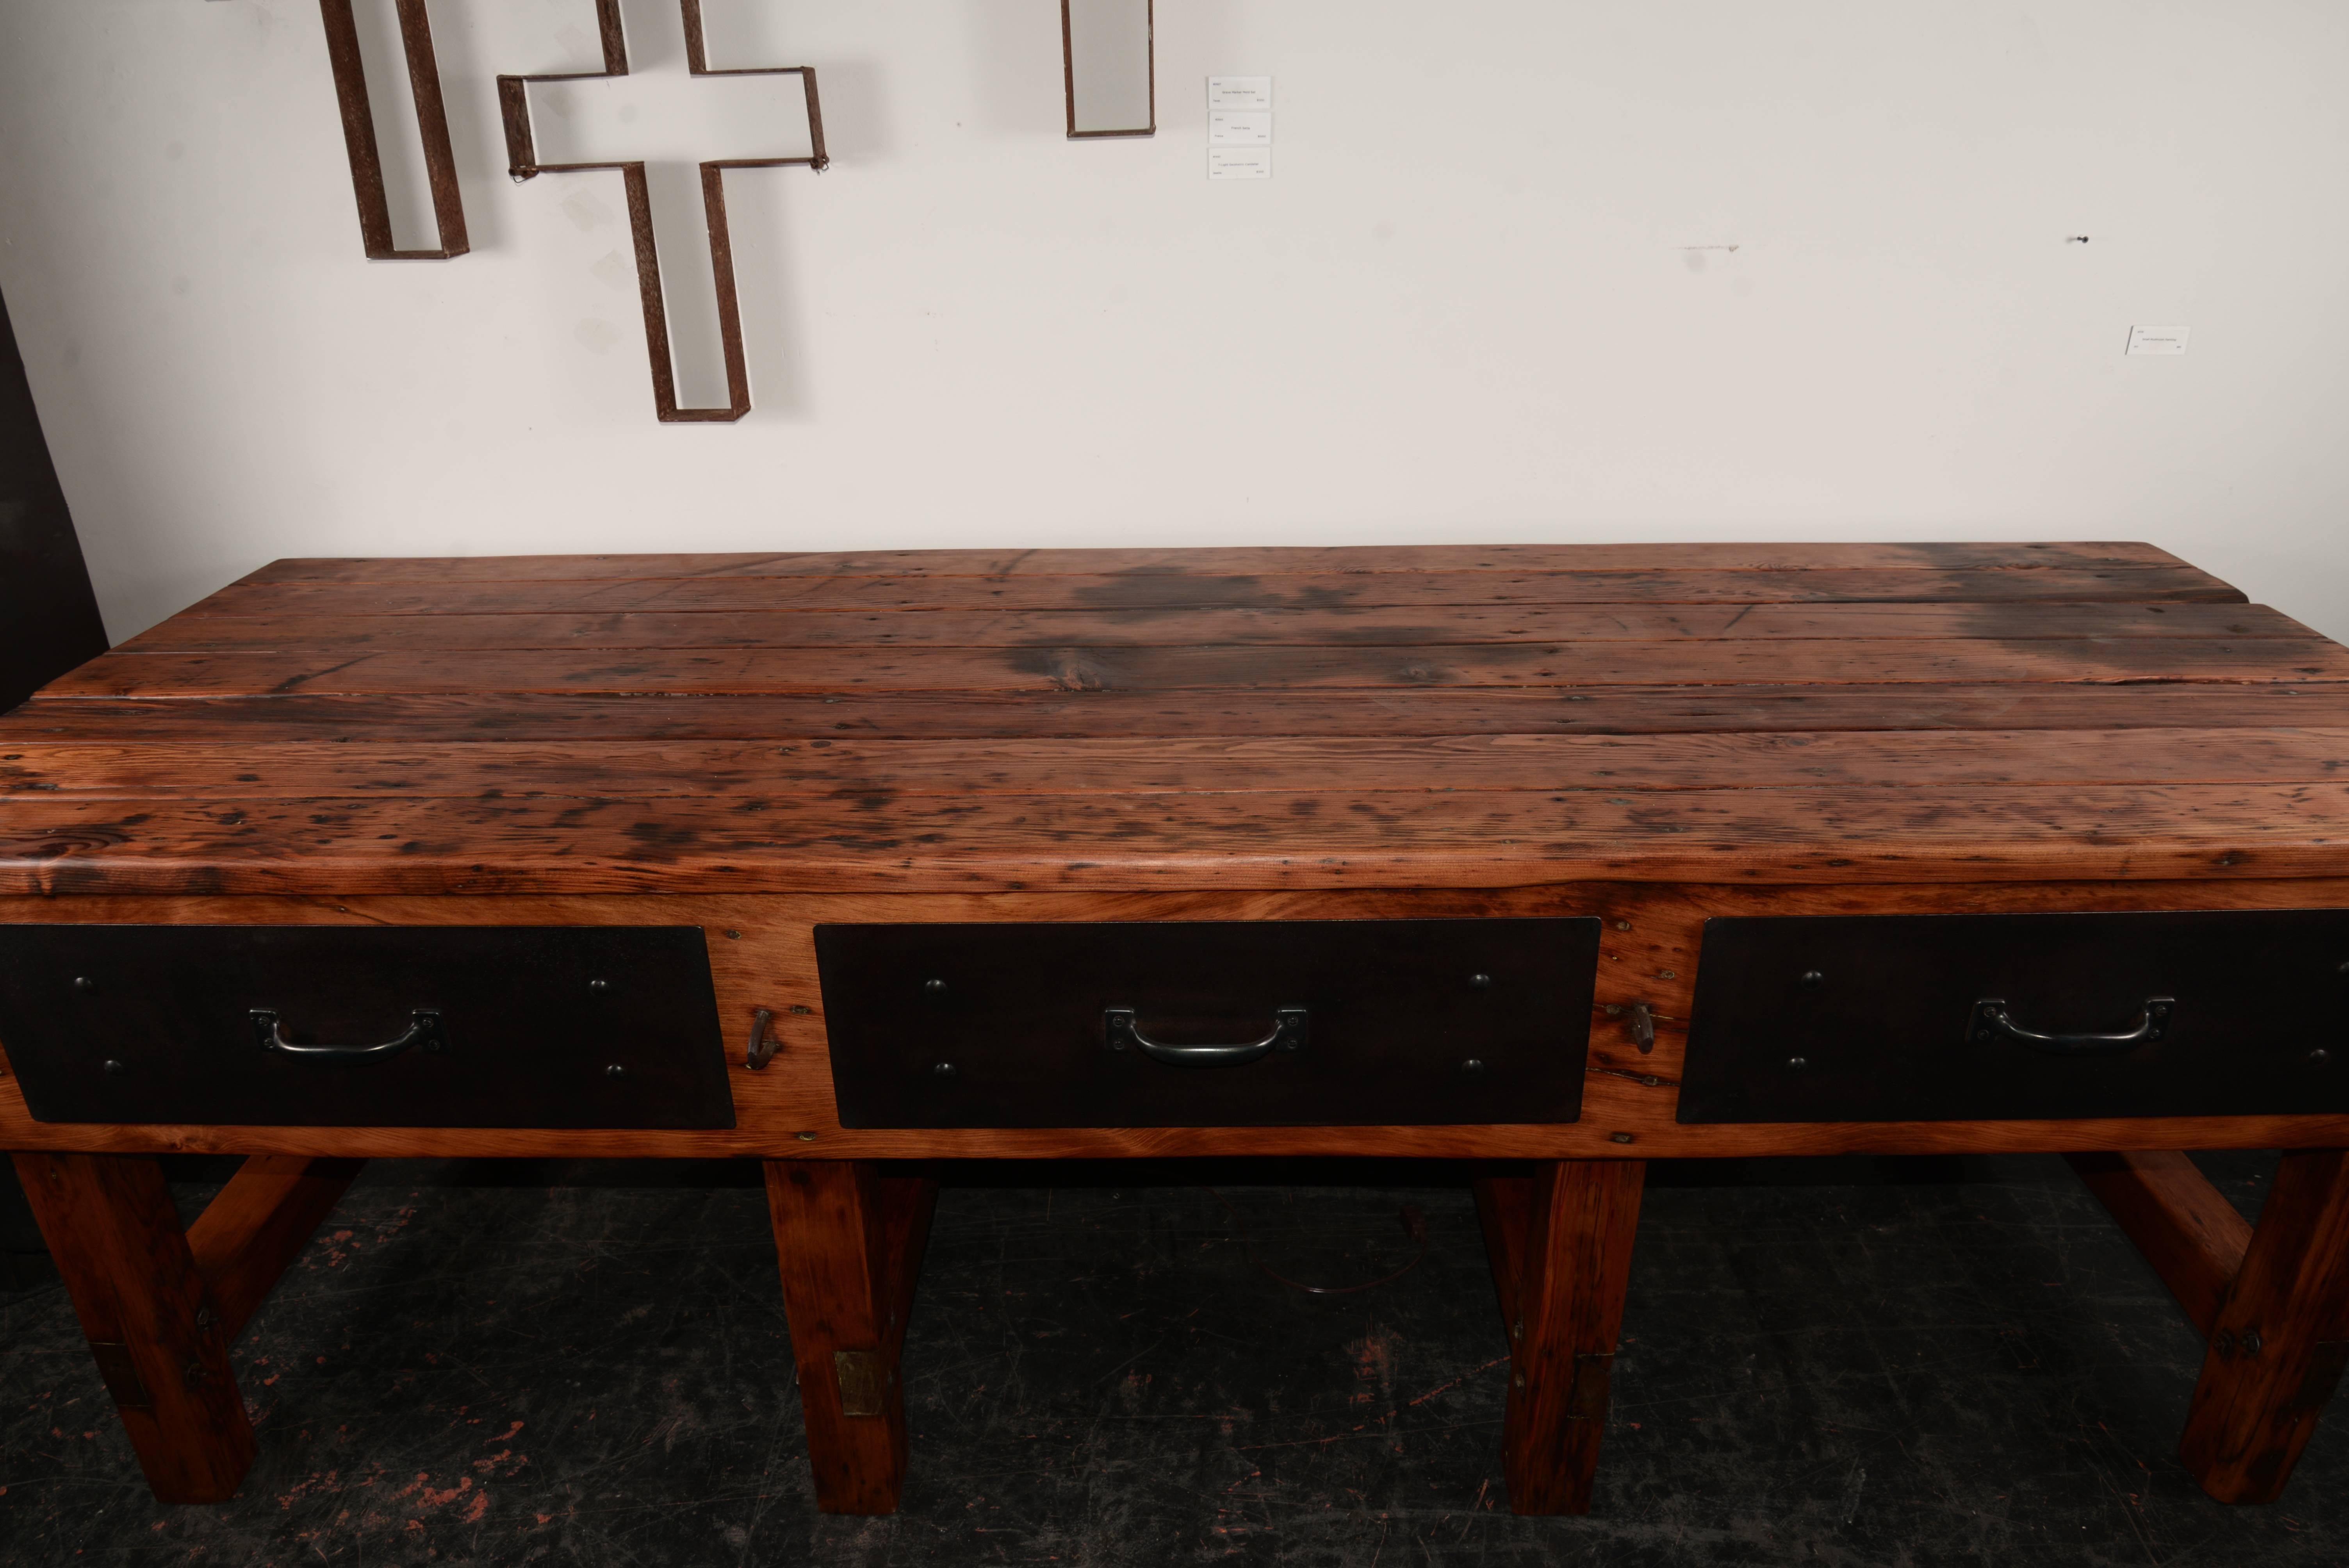 Massive early century douglas fir and steel foremans station. Three deep drawers open and close beautifully. This piece is super clean and ready to enjoy.